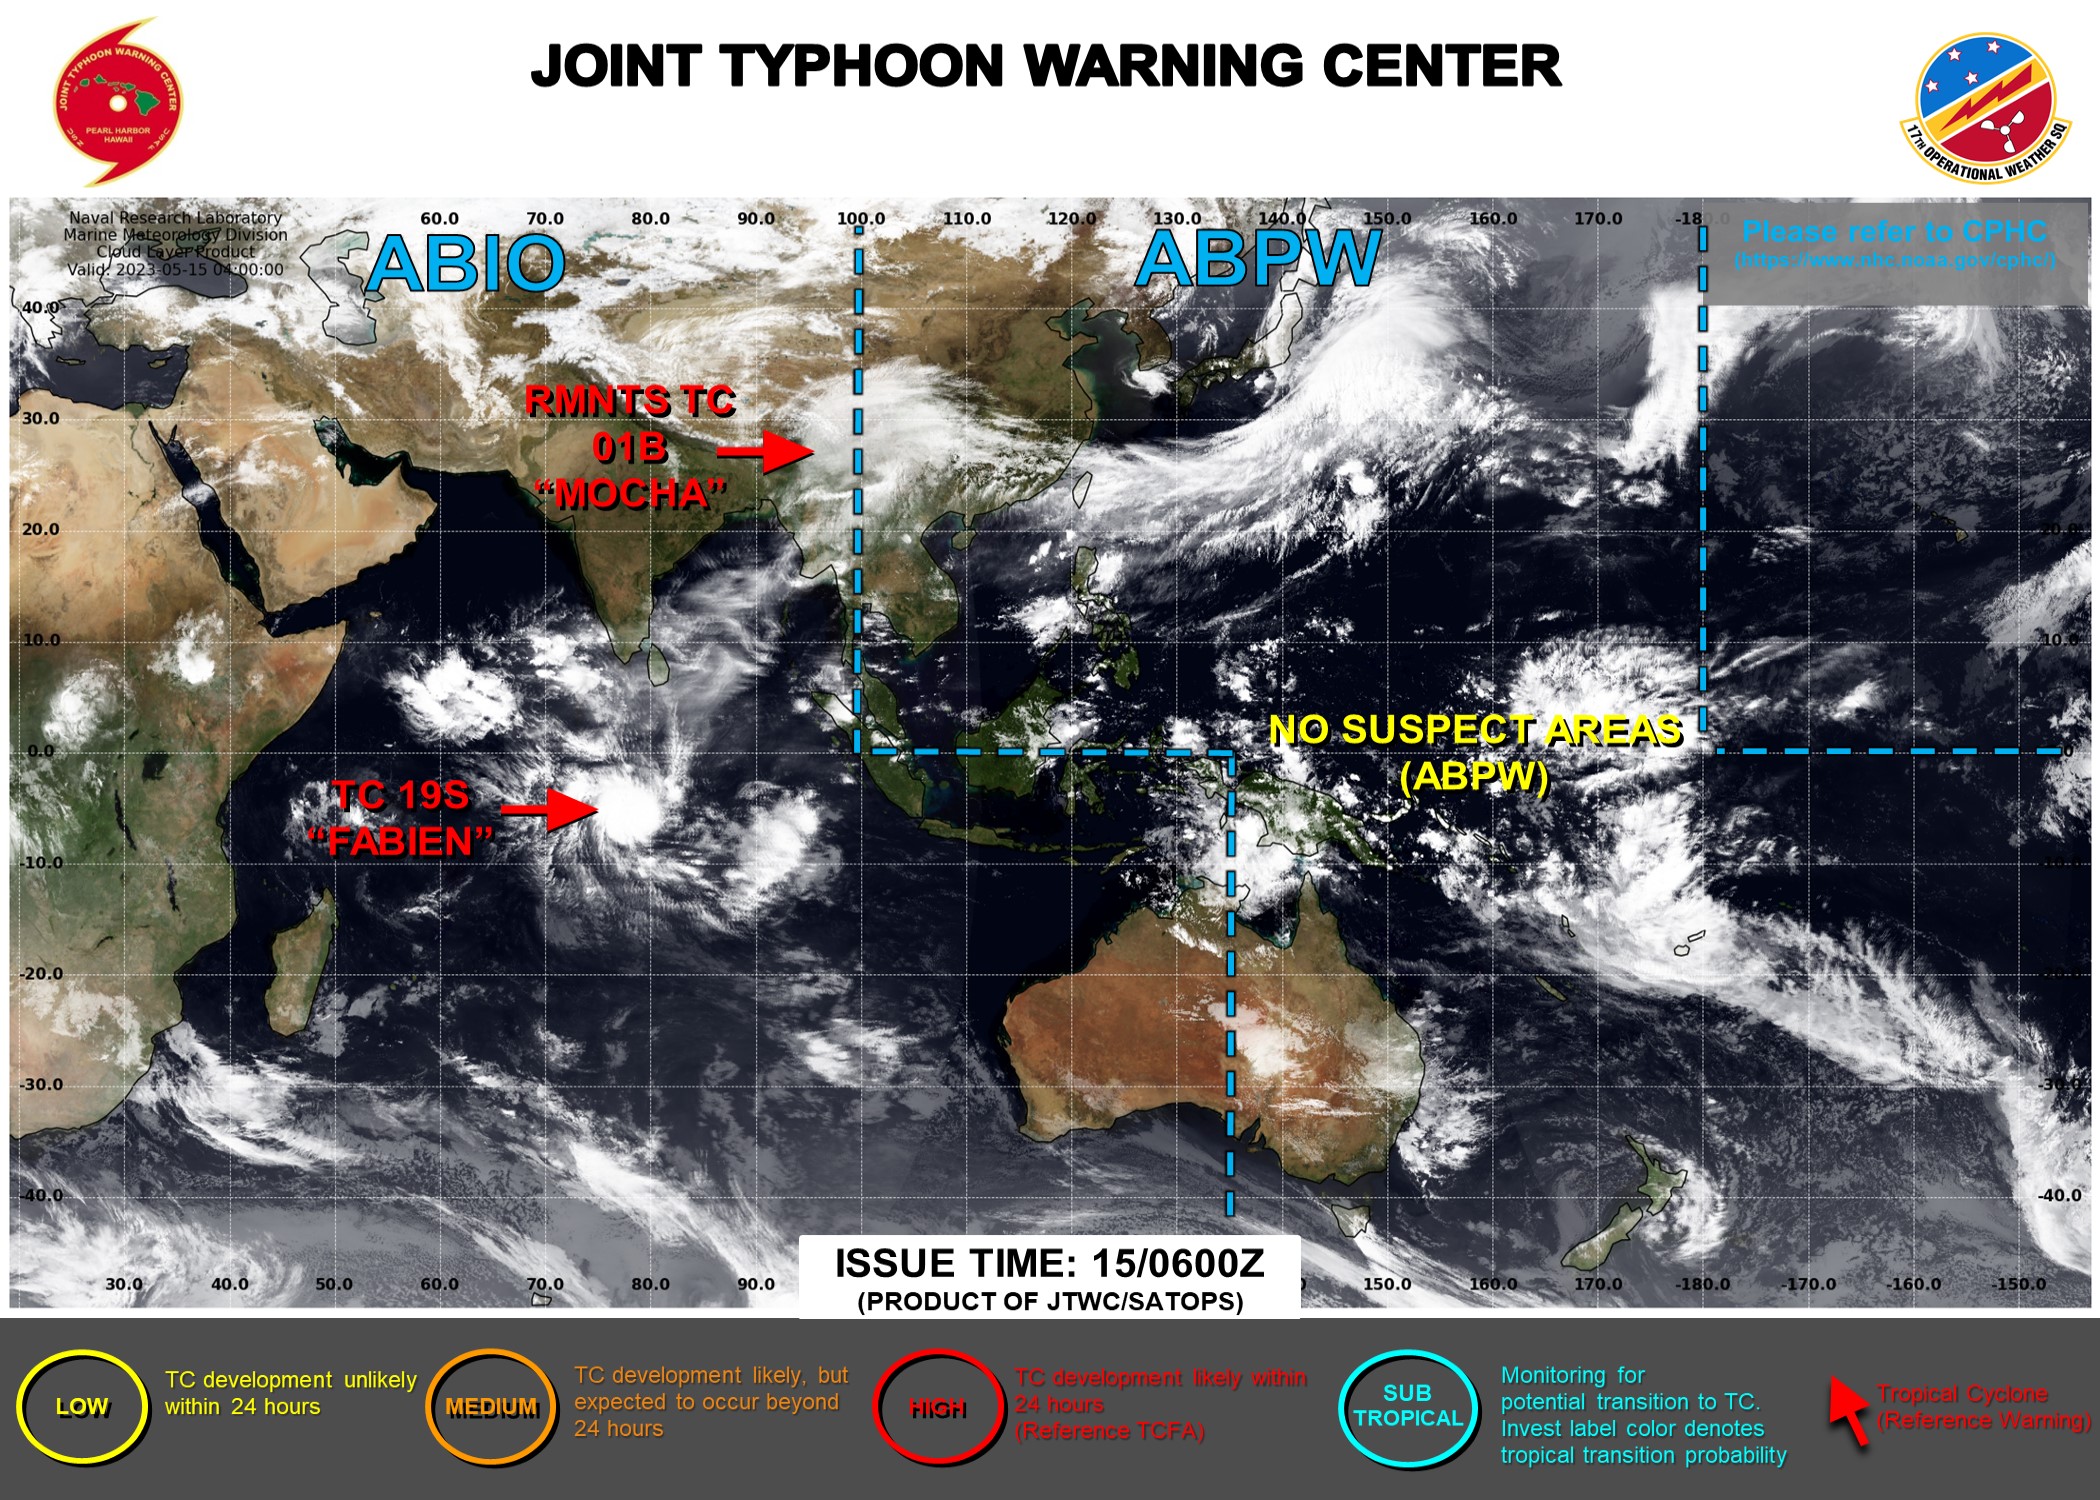 JTWC IS ISSUING 6HOURLY WARNINGS AND 3HOURLY SATELLITE BULLETINS ON TC 19S(FABIEN). 3HOURLY SATELLITE BULLETINS WERE DISCONTINUED ON THE REMNANTS OF TC 01B(MOCHA) AT 15/0530UTC.